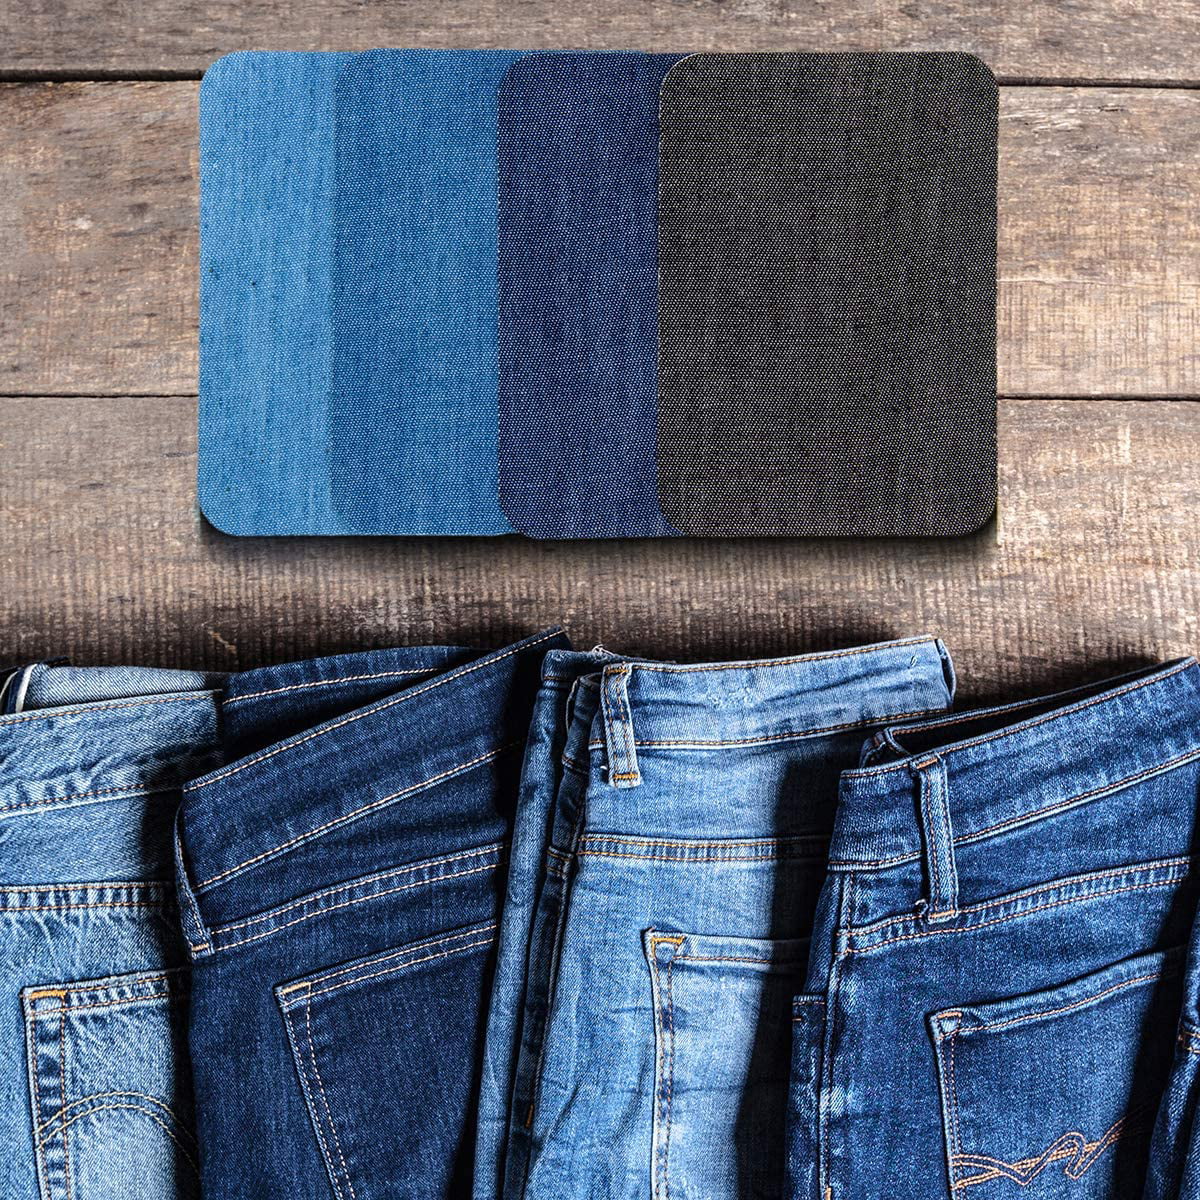 Dtydtpe Jeans Patch Denim Iron on Jean Patches Inside & Outside Strongest Glue Assorted Shades of Blue Repair Decorating 2.75 inch